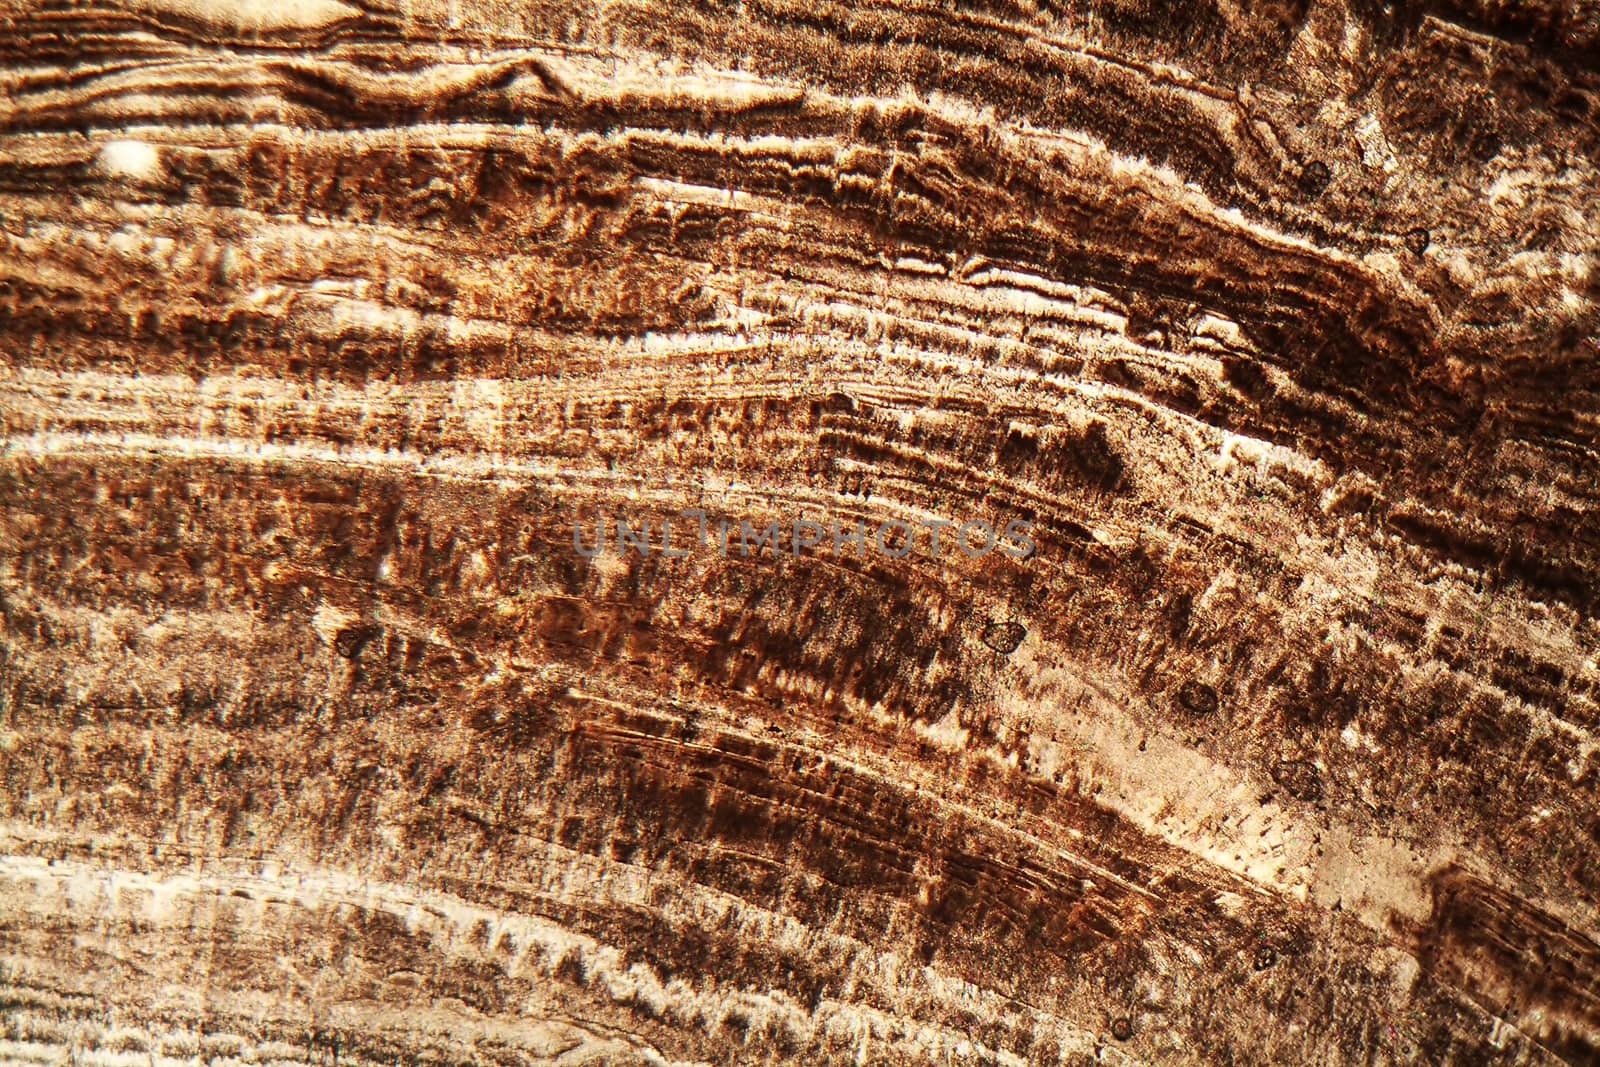 Thin section of a calcareous stalagmite with annual growing layers (magnification 80x and polarized light).